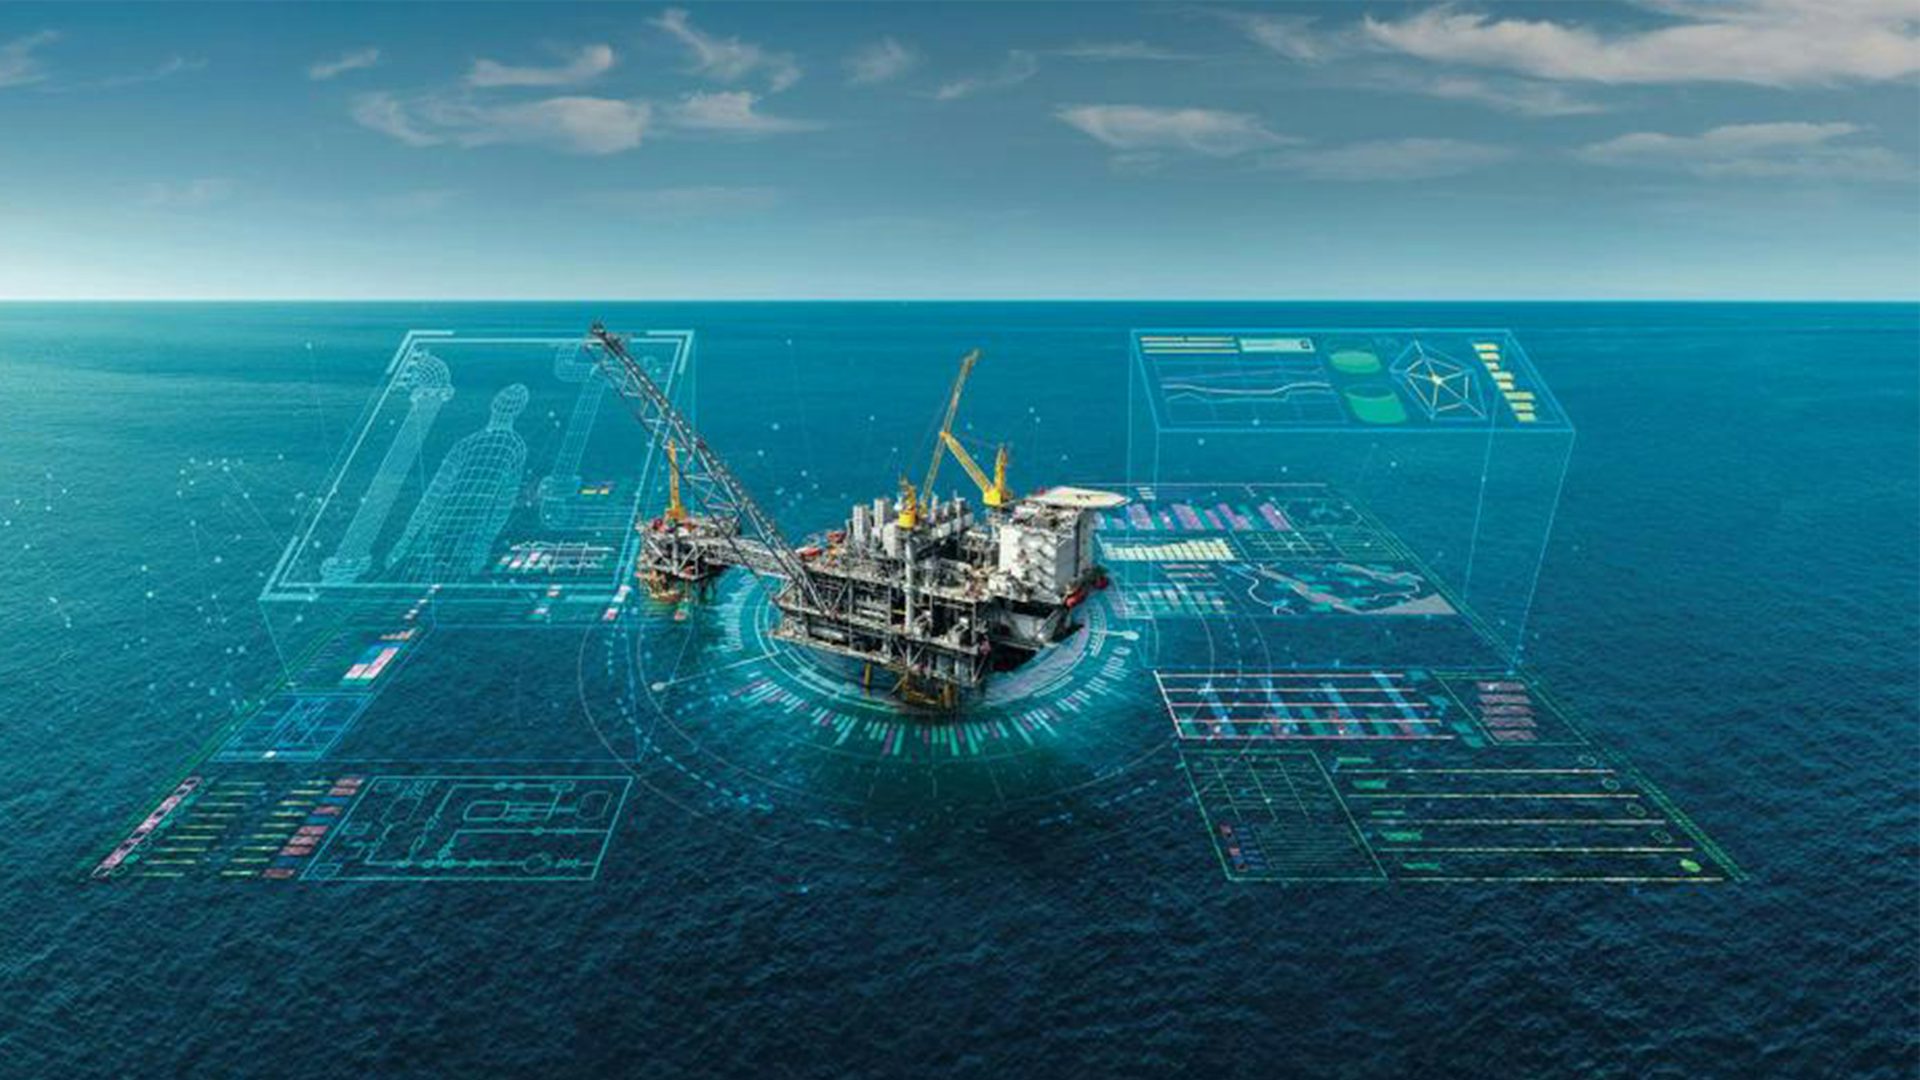 An oil rig in the middle of the ocean with a 3D software overlay.